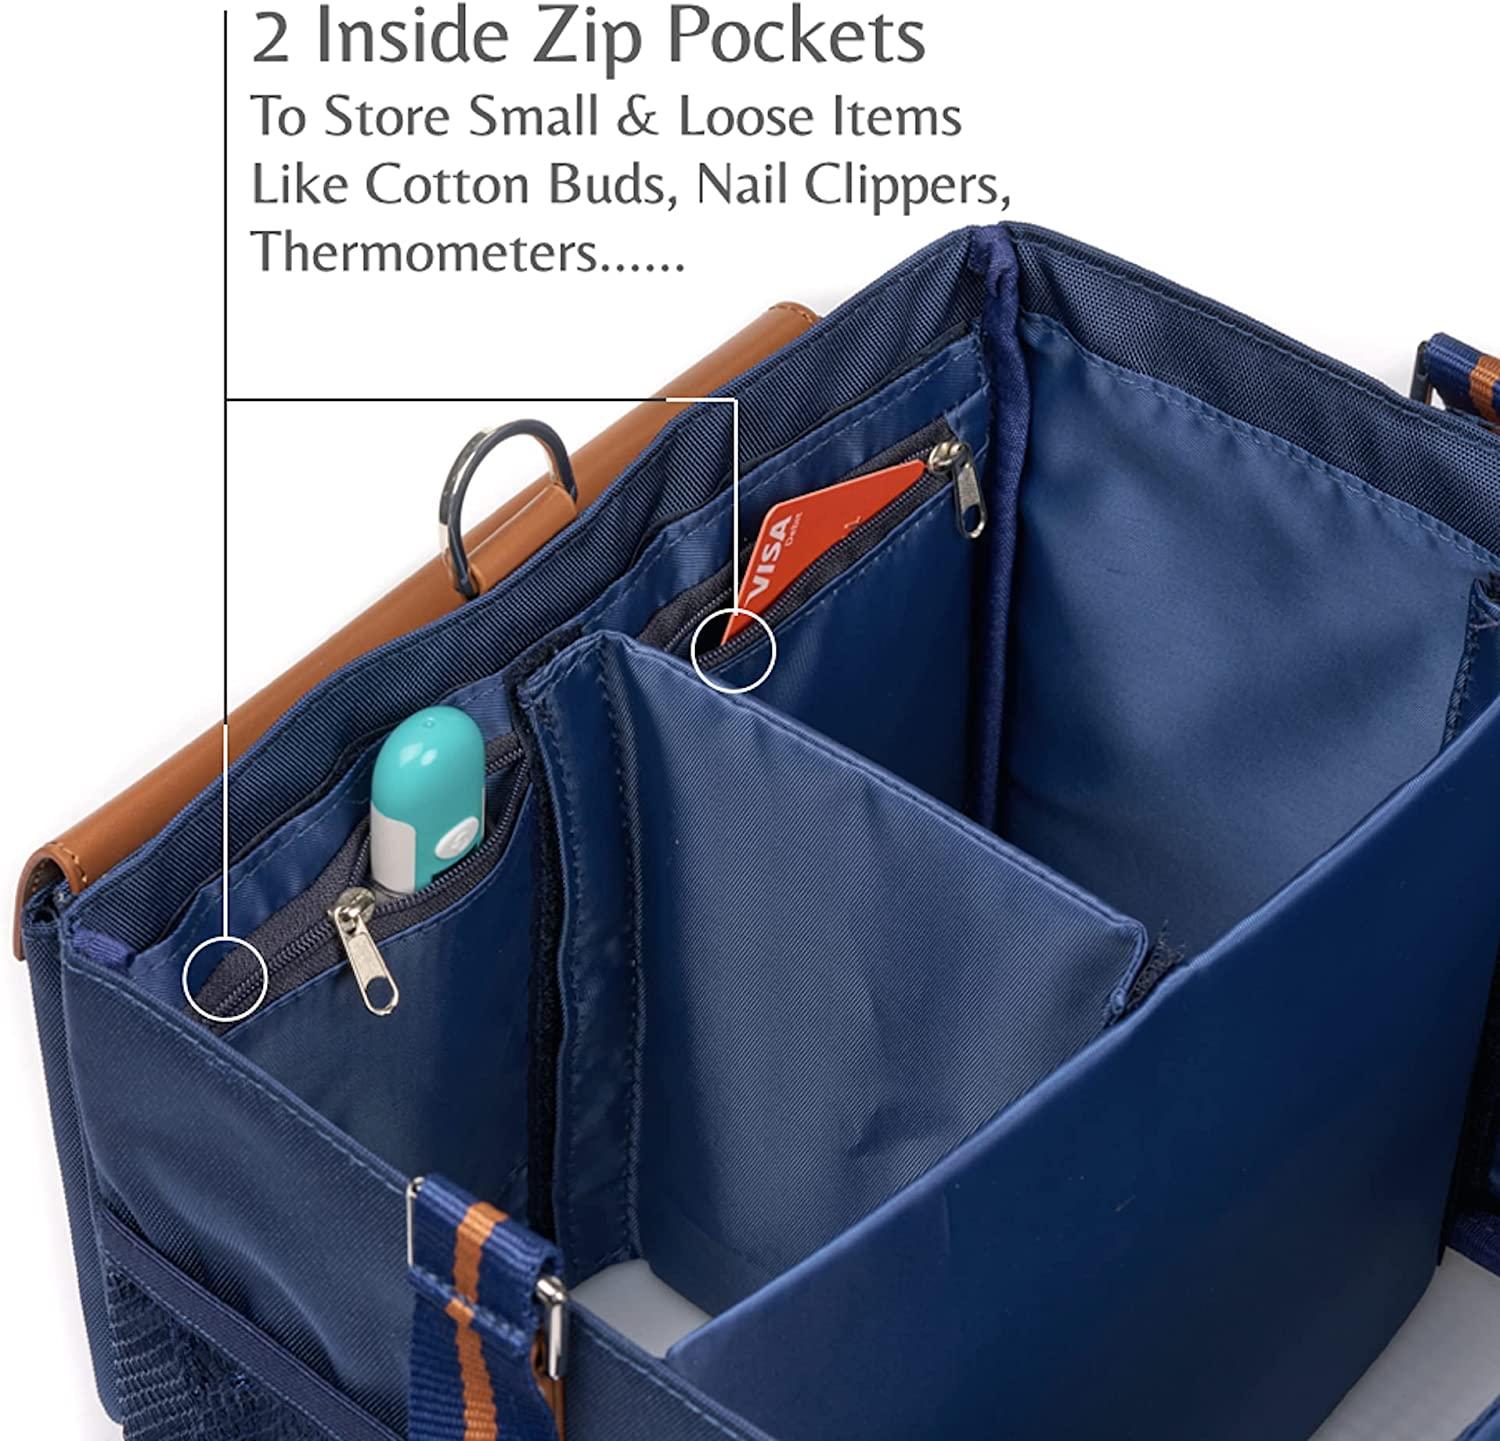 Cleaning Caddy With Handle and Shoulder Strap Organizer for Cleaning  Supplies 